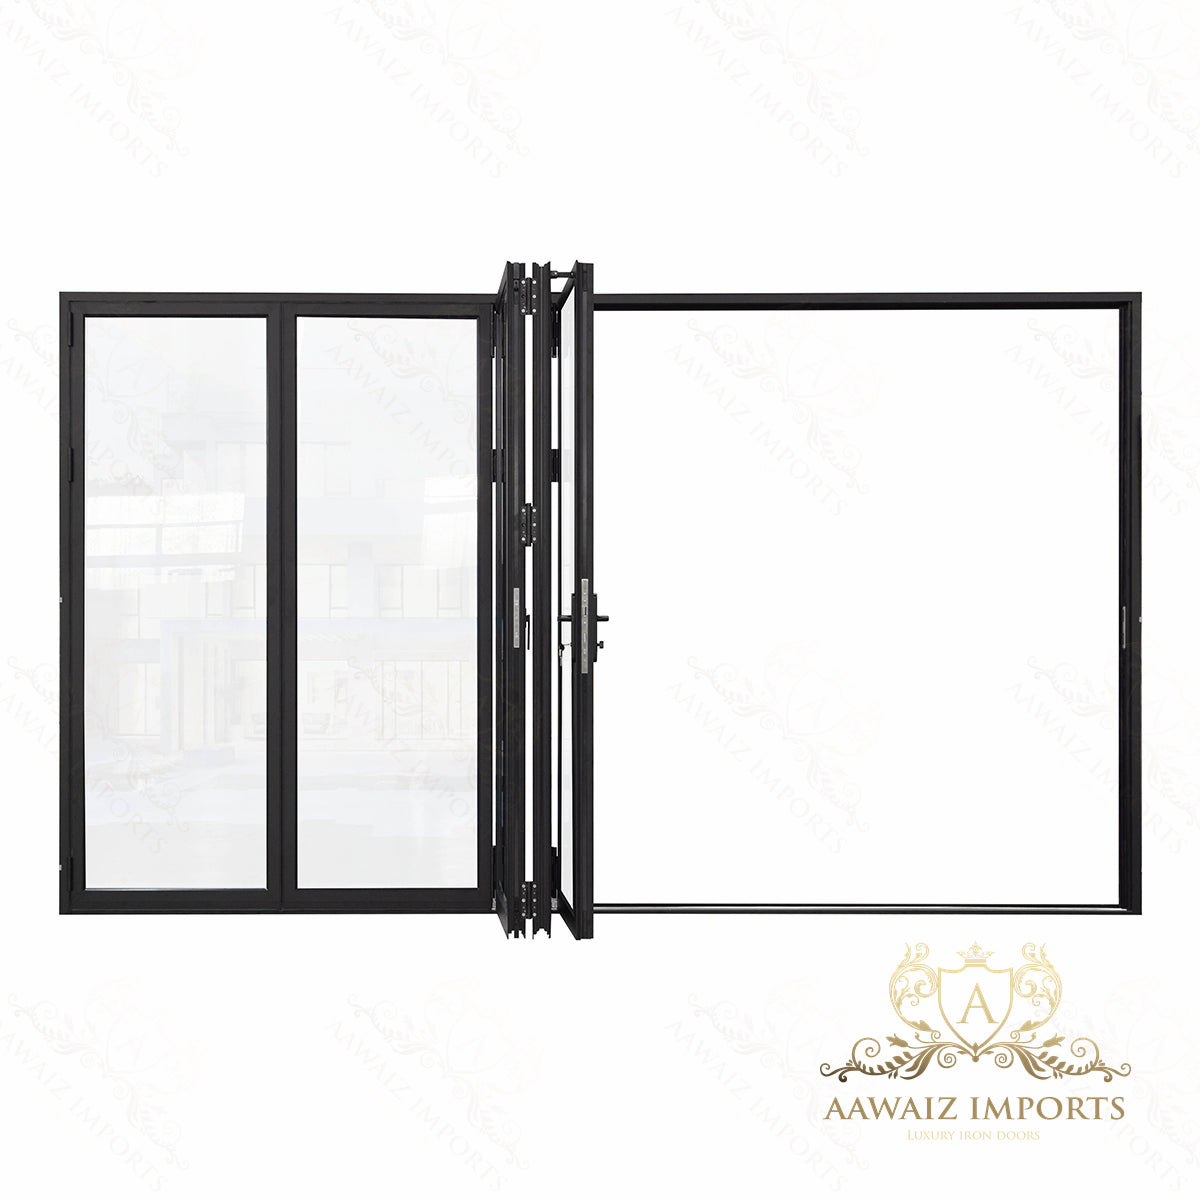 12 Ft Wide By 7 Ft Tall (144" By 84") Aluminum Bi Fold Patio Door  Outswing  Thermal Break Insulated Matt Black Finish